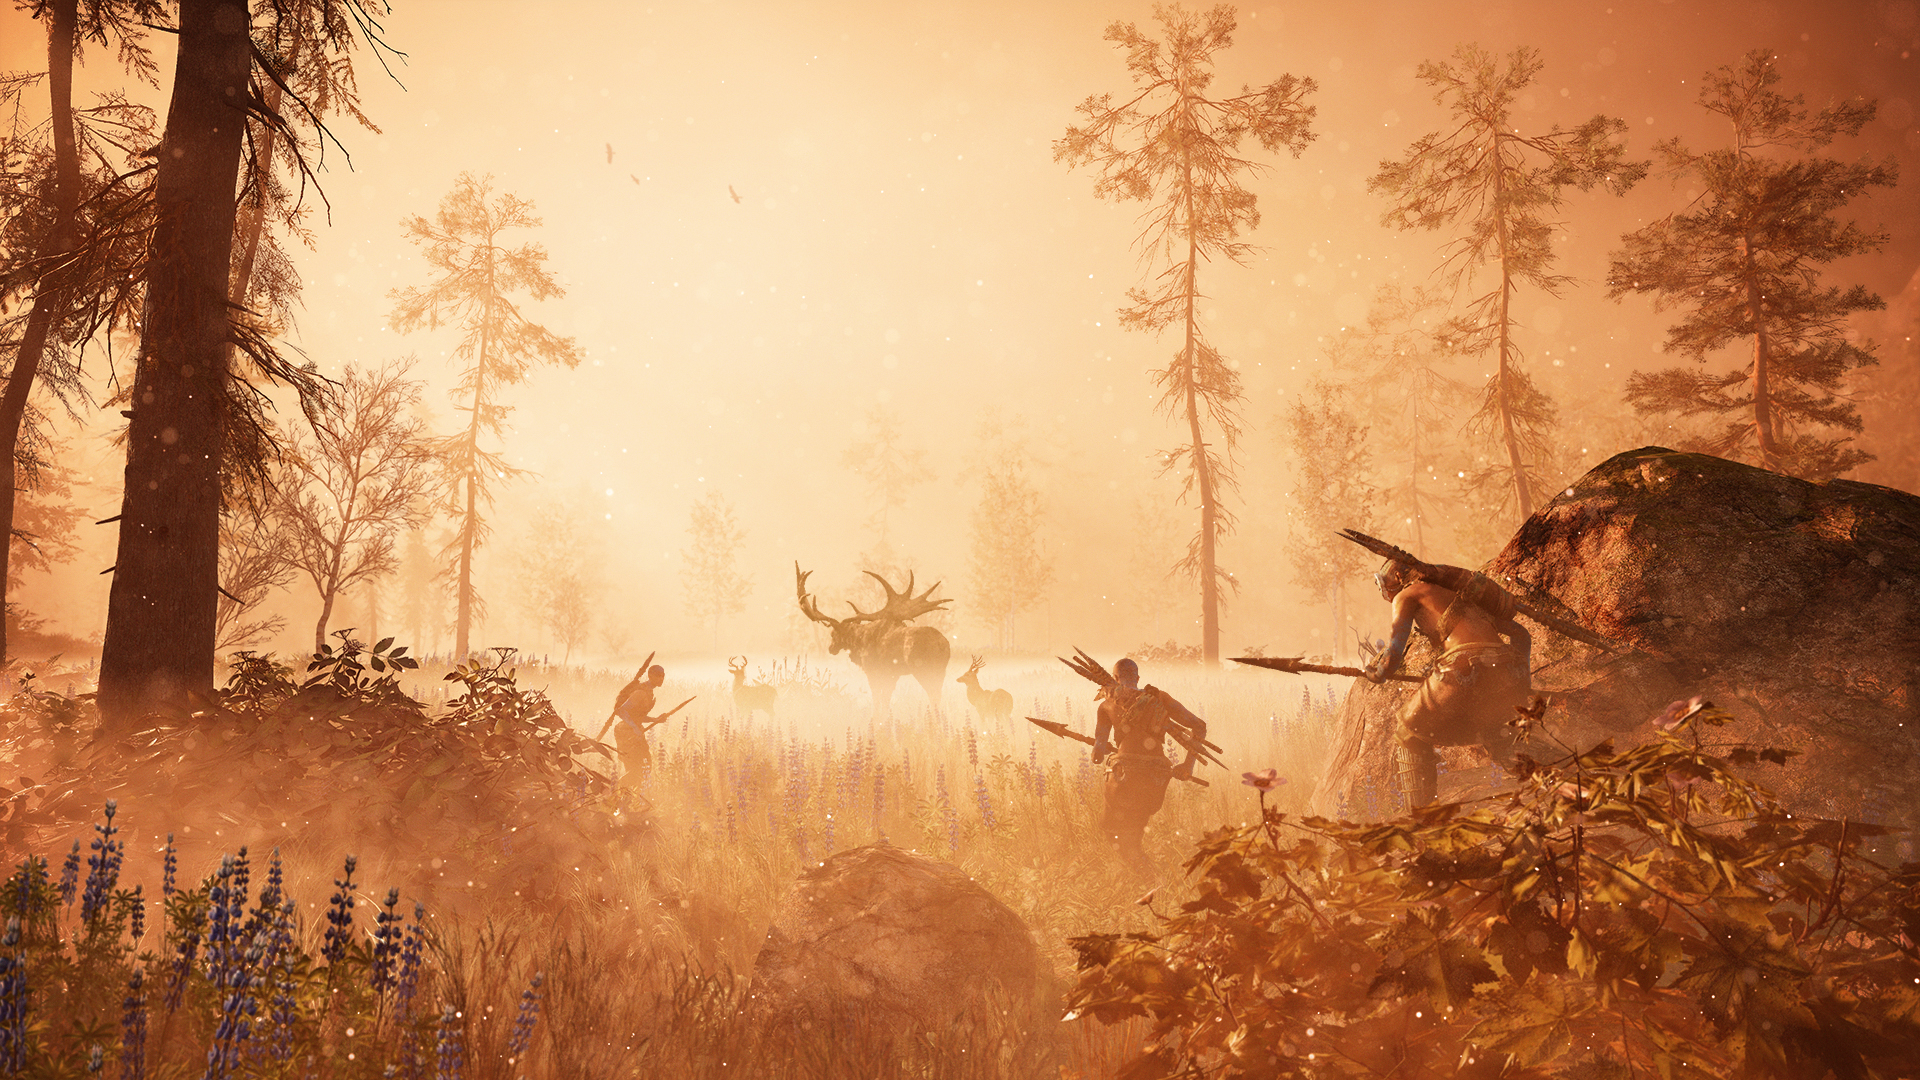 Far Cry Primal Hands On Preview #2